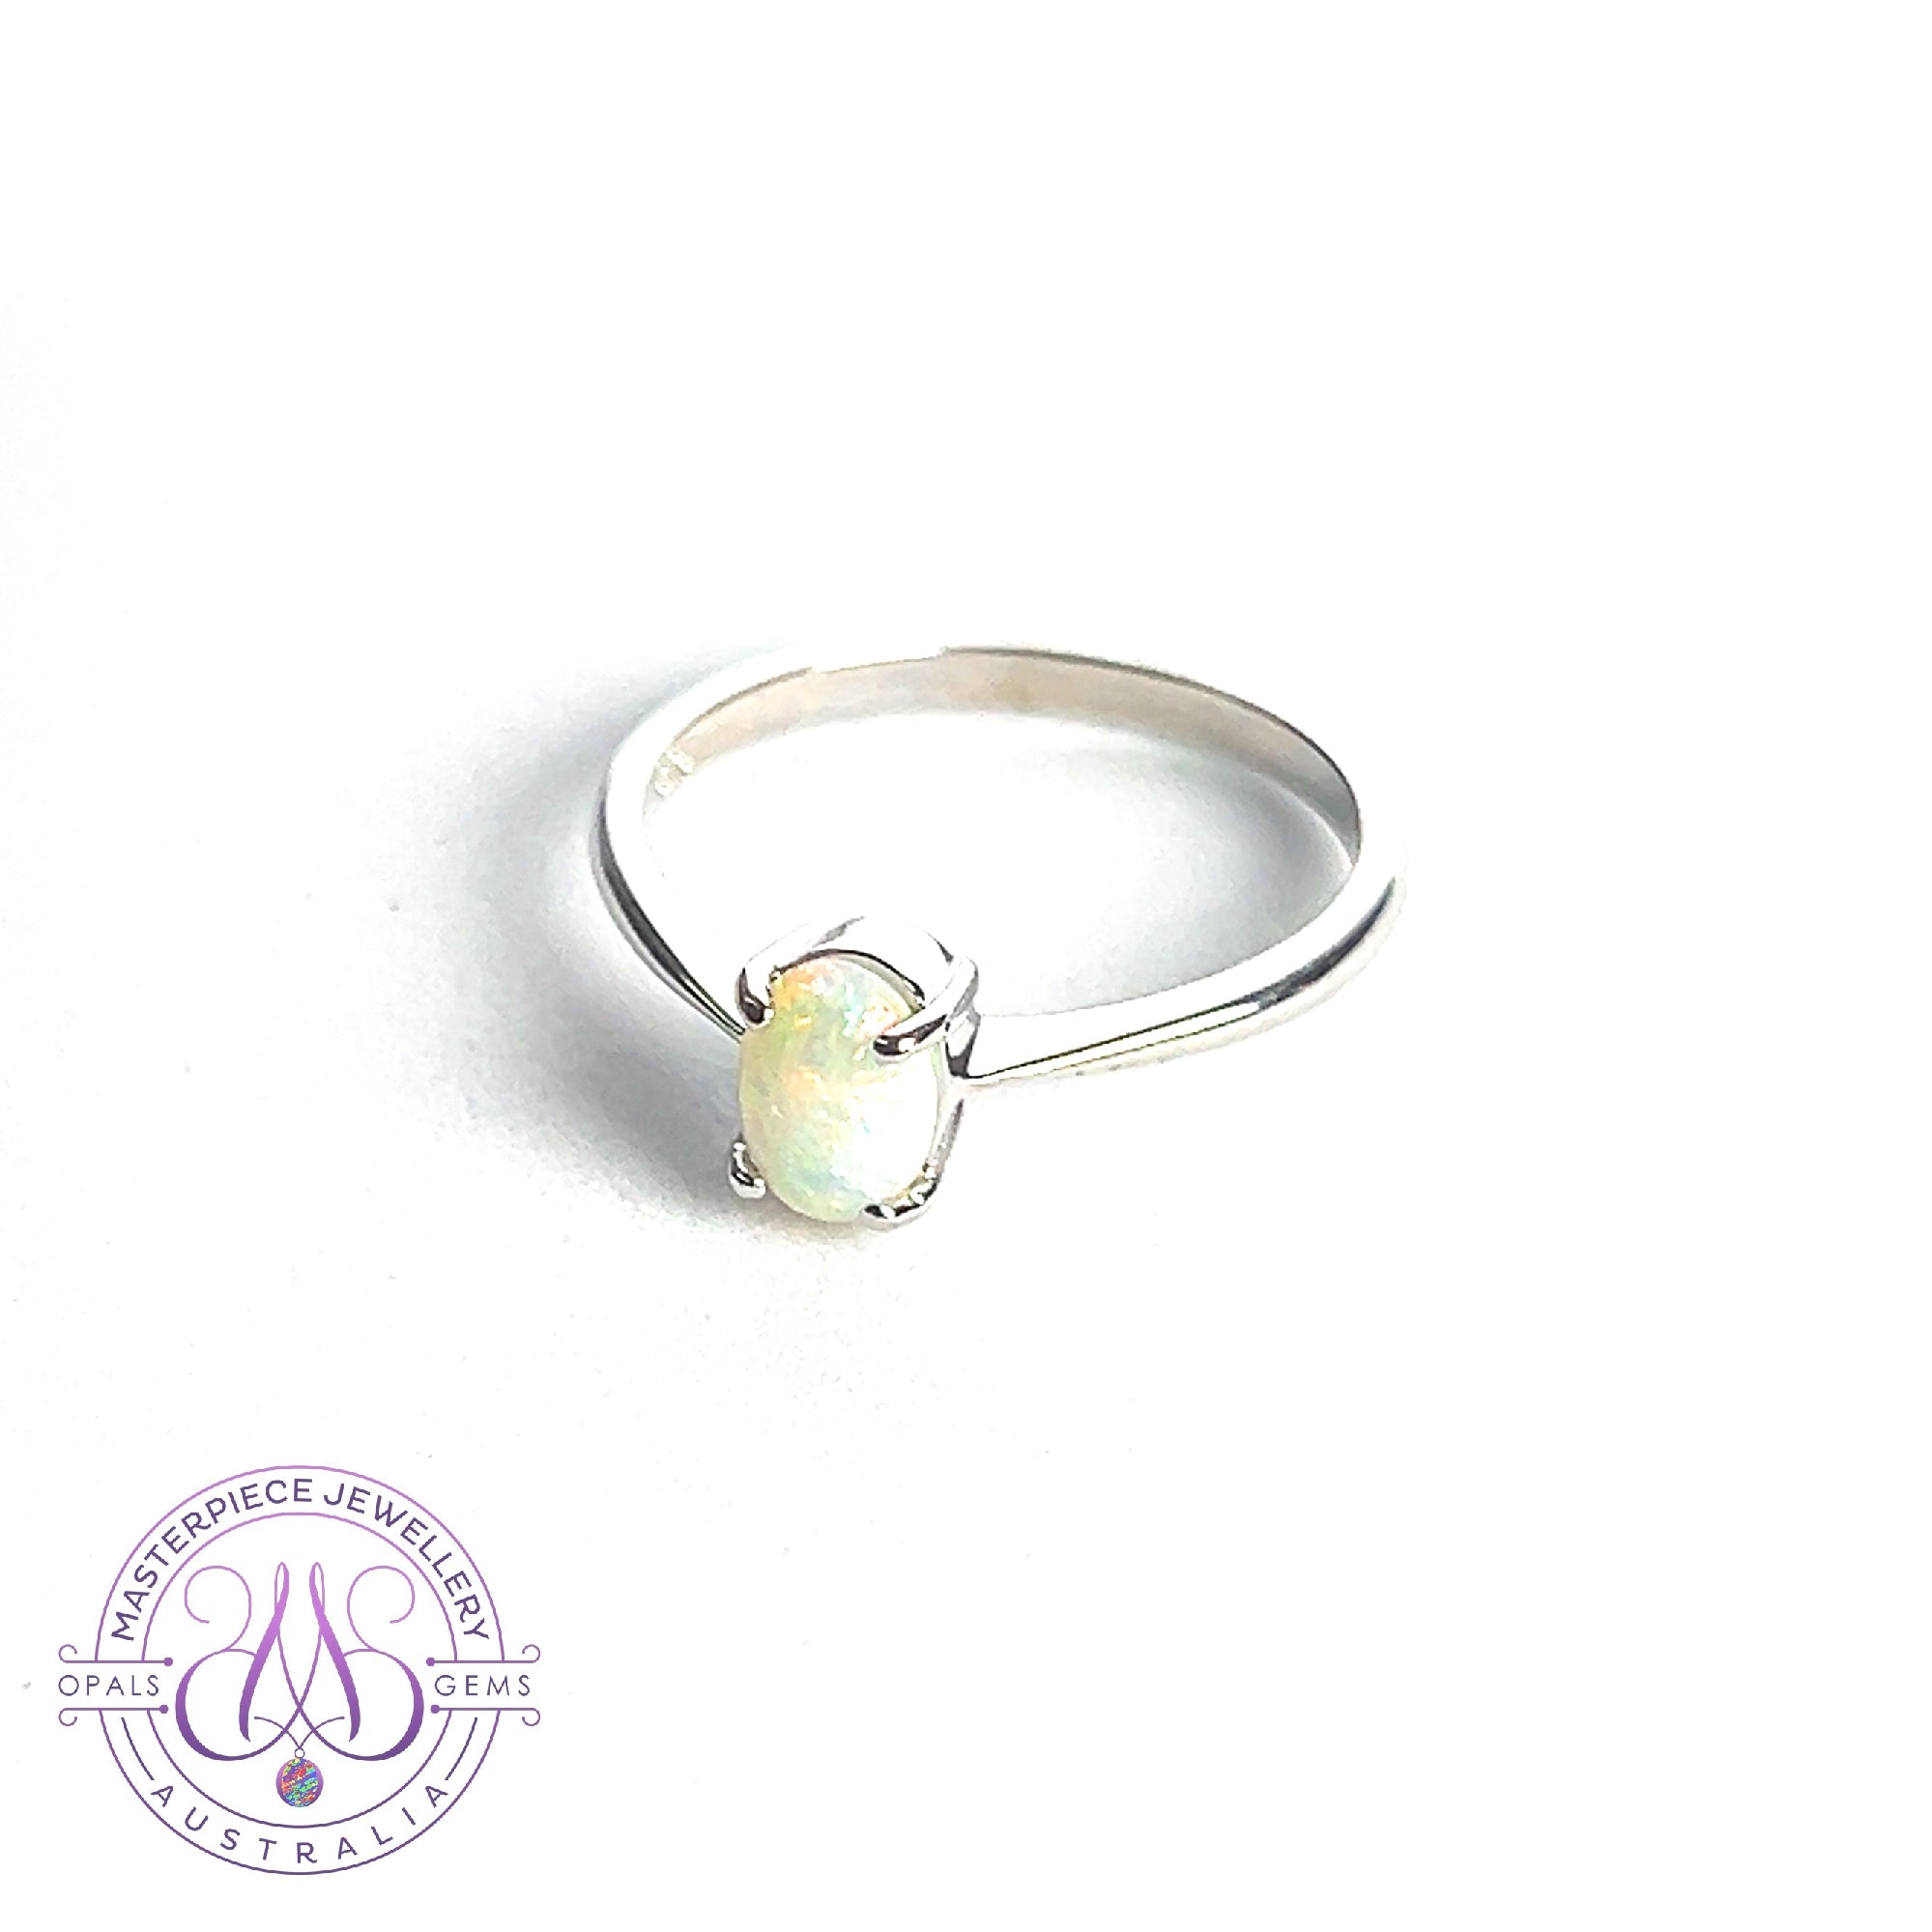 9kt White Gold solitaire White Opal 0.5ct ring